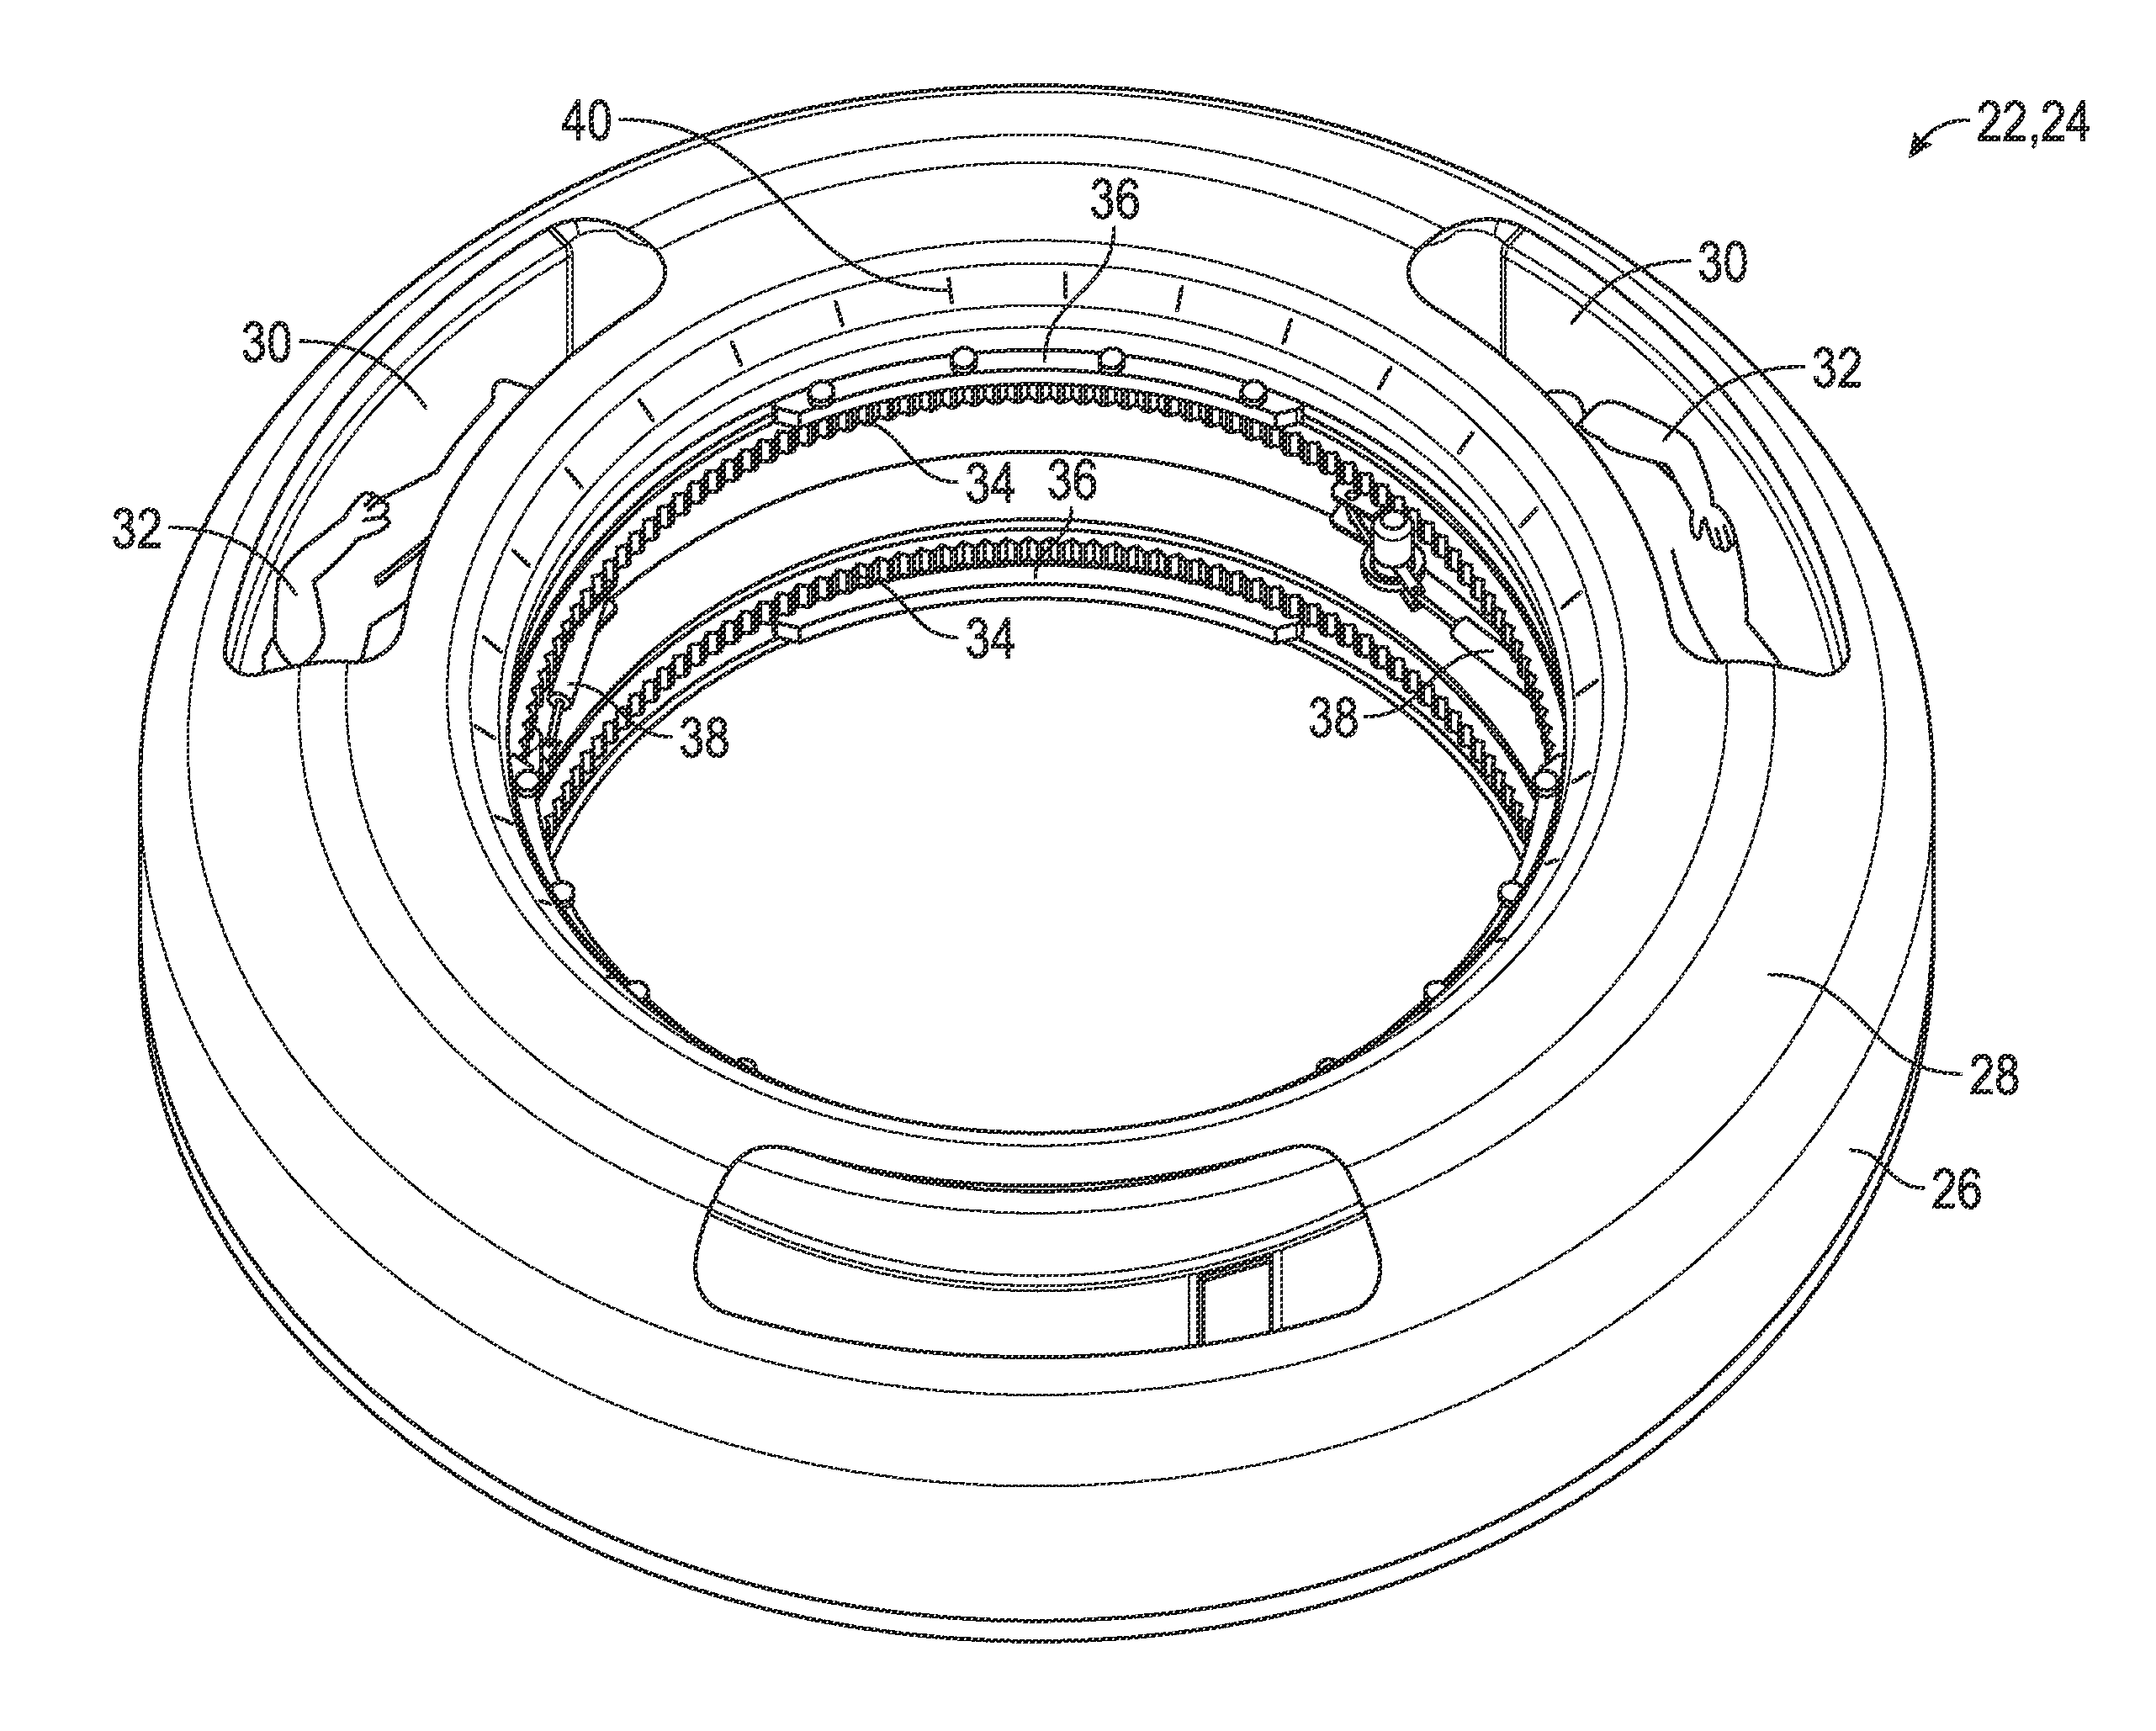 System and method of providing artificial gravity